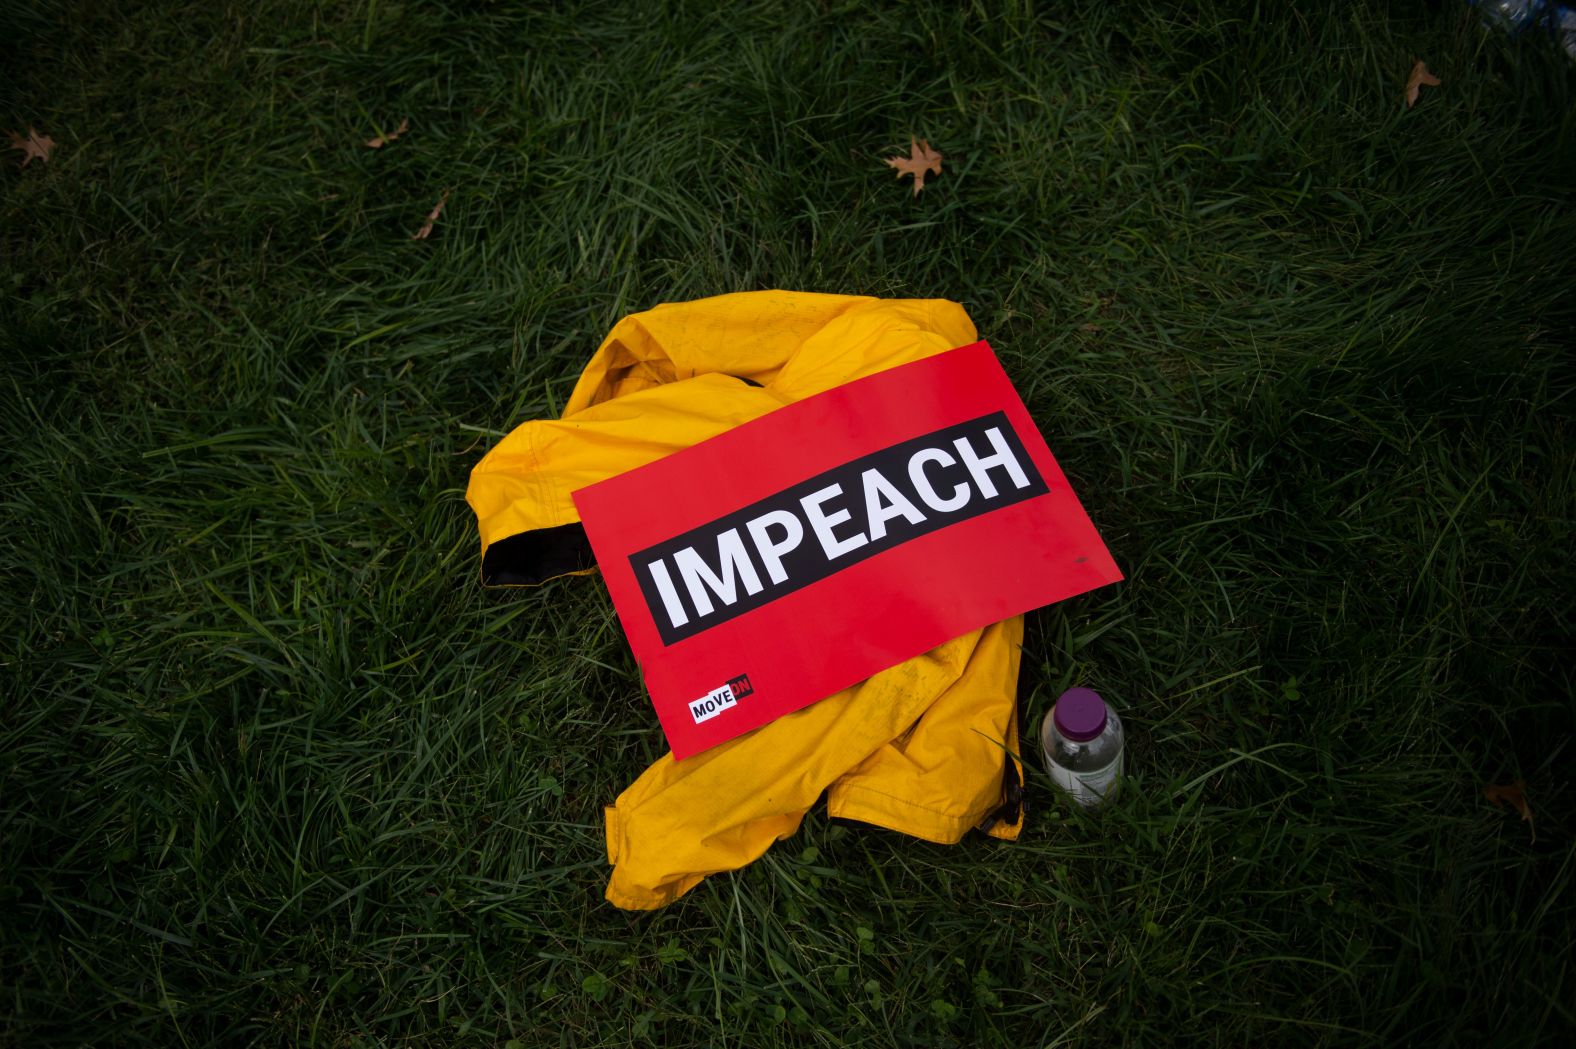 An "impeach" sign is seen on the grass during a rally in Washington on September 26.